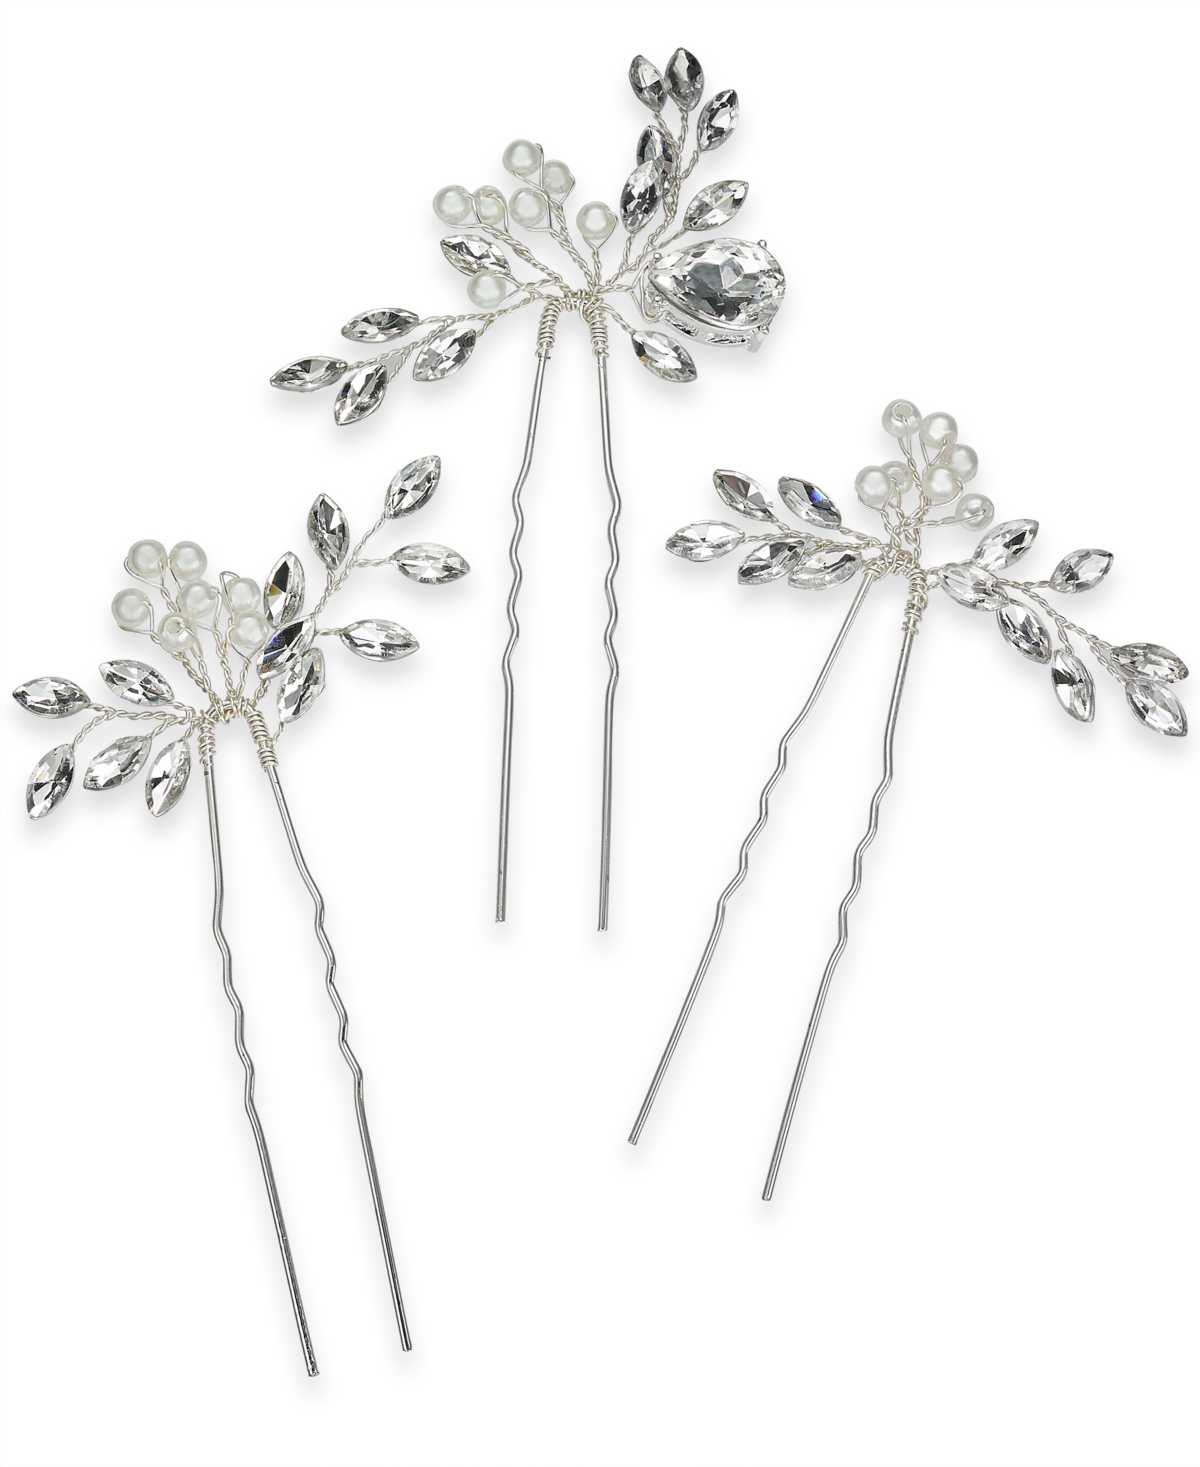 3-Pc. Set Crystal & Imitation Pearl Bead Bobby Pins, Created for Macy's - Silver